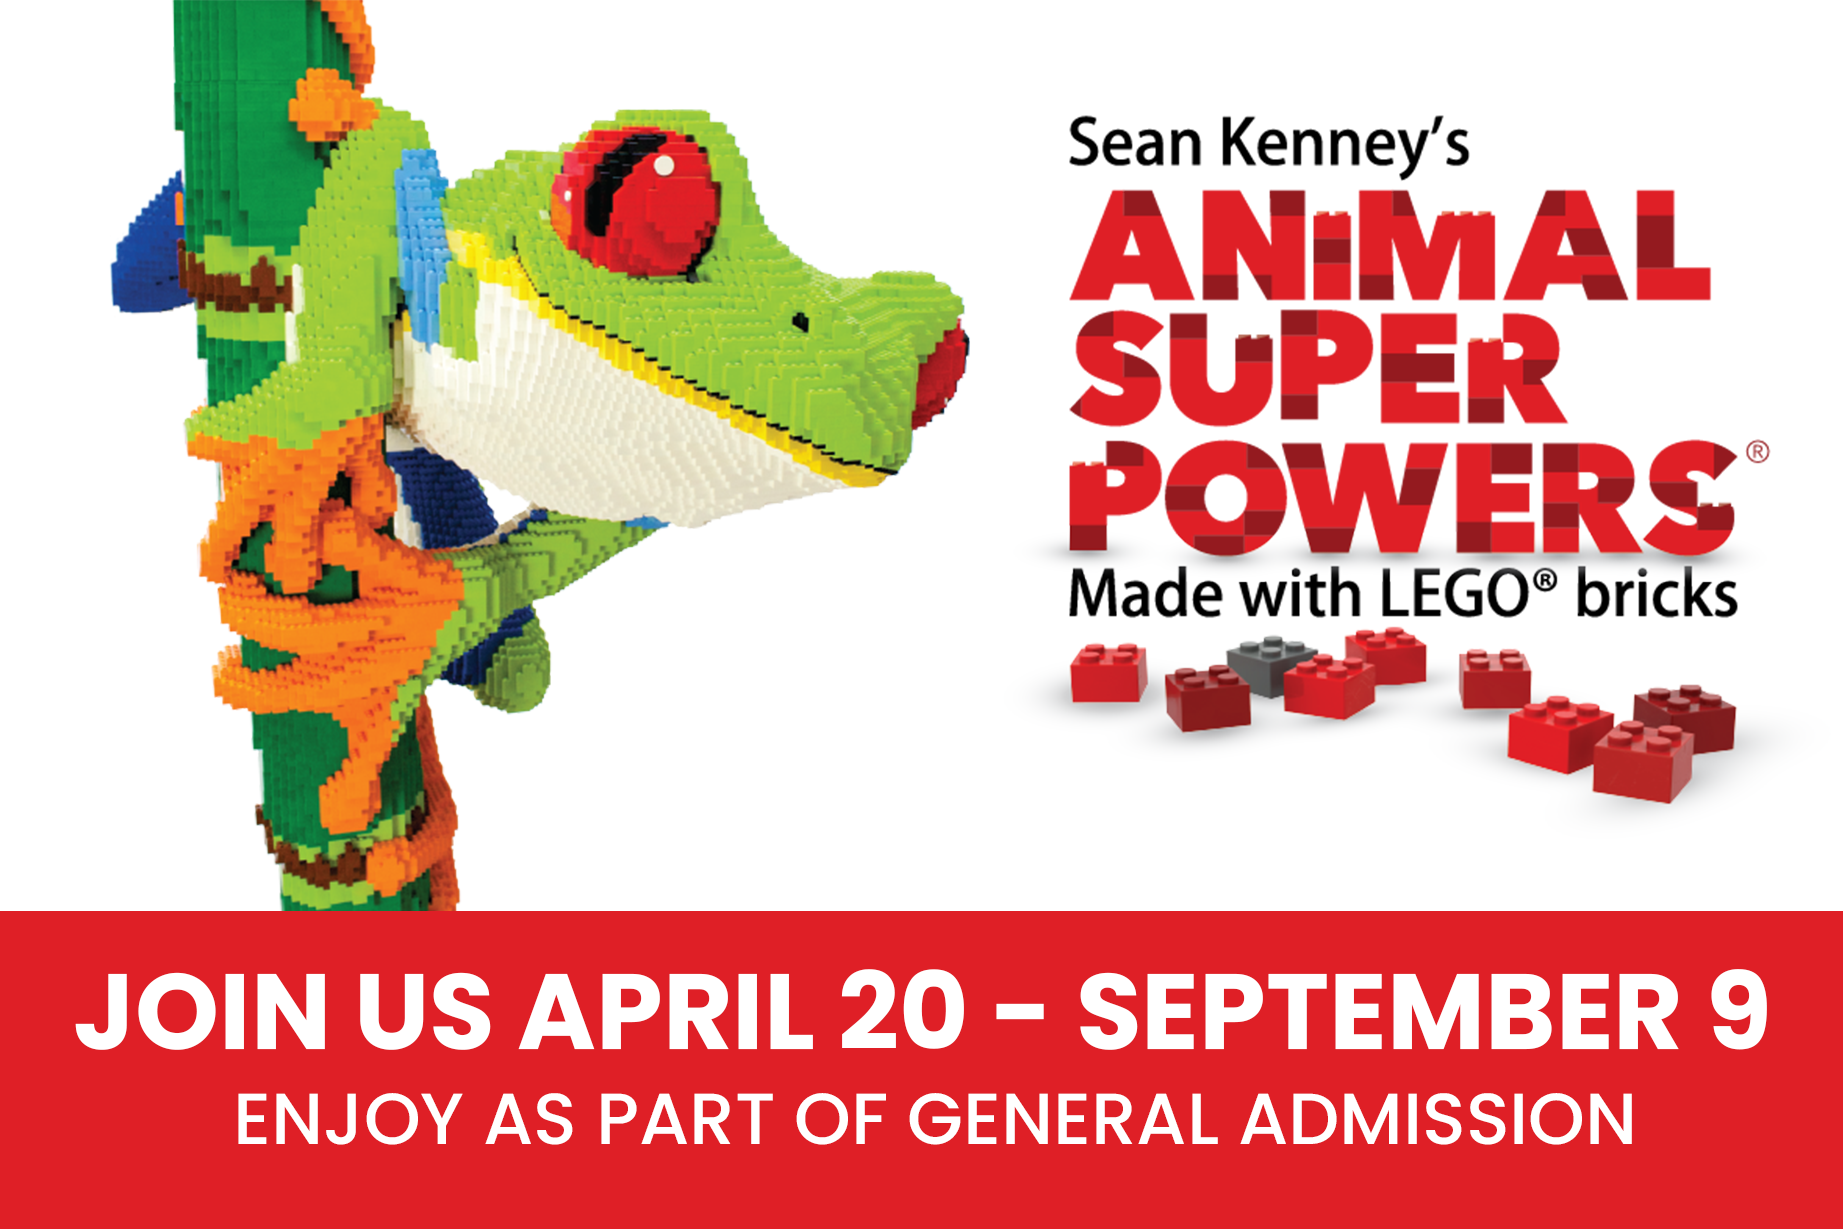 <h1 class="tribe-events-single-event-title">The Topeka Zoo welcomes Sean Kenney’s Animal Superpowers® made with Lego® Bricks</h1>